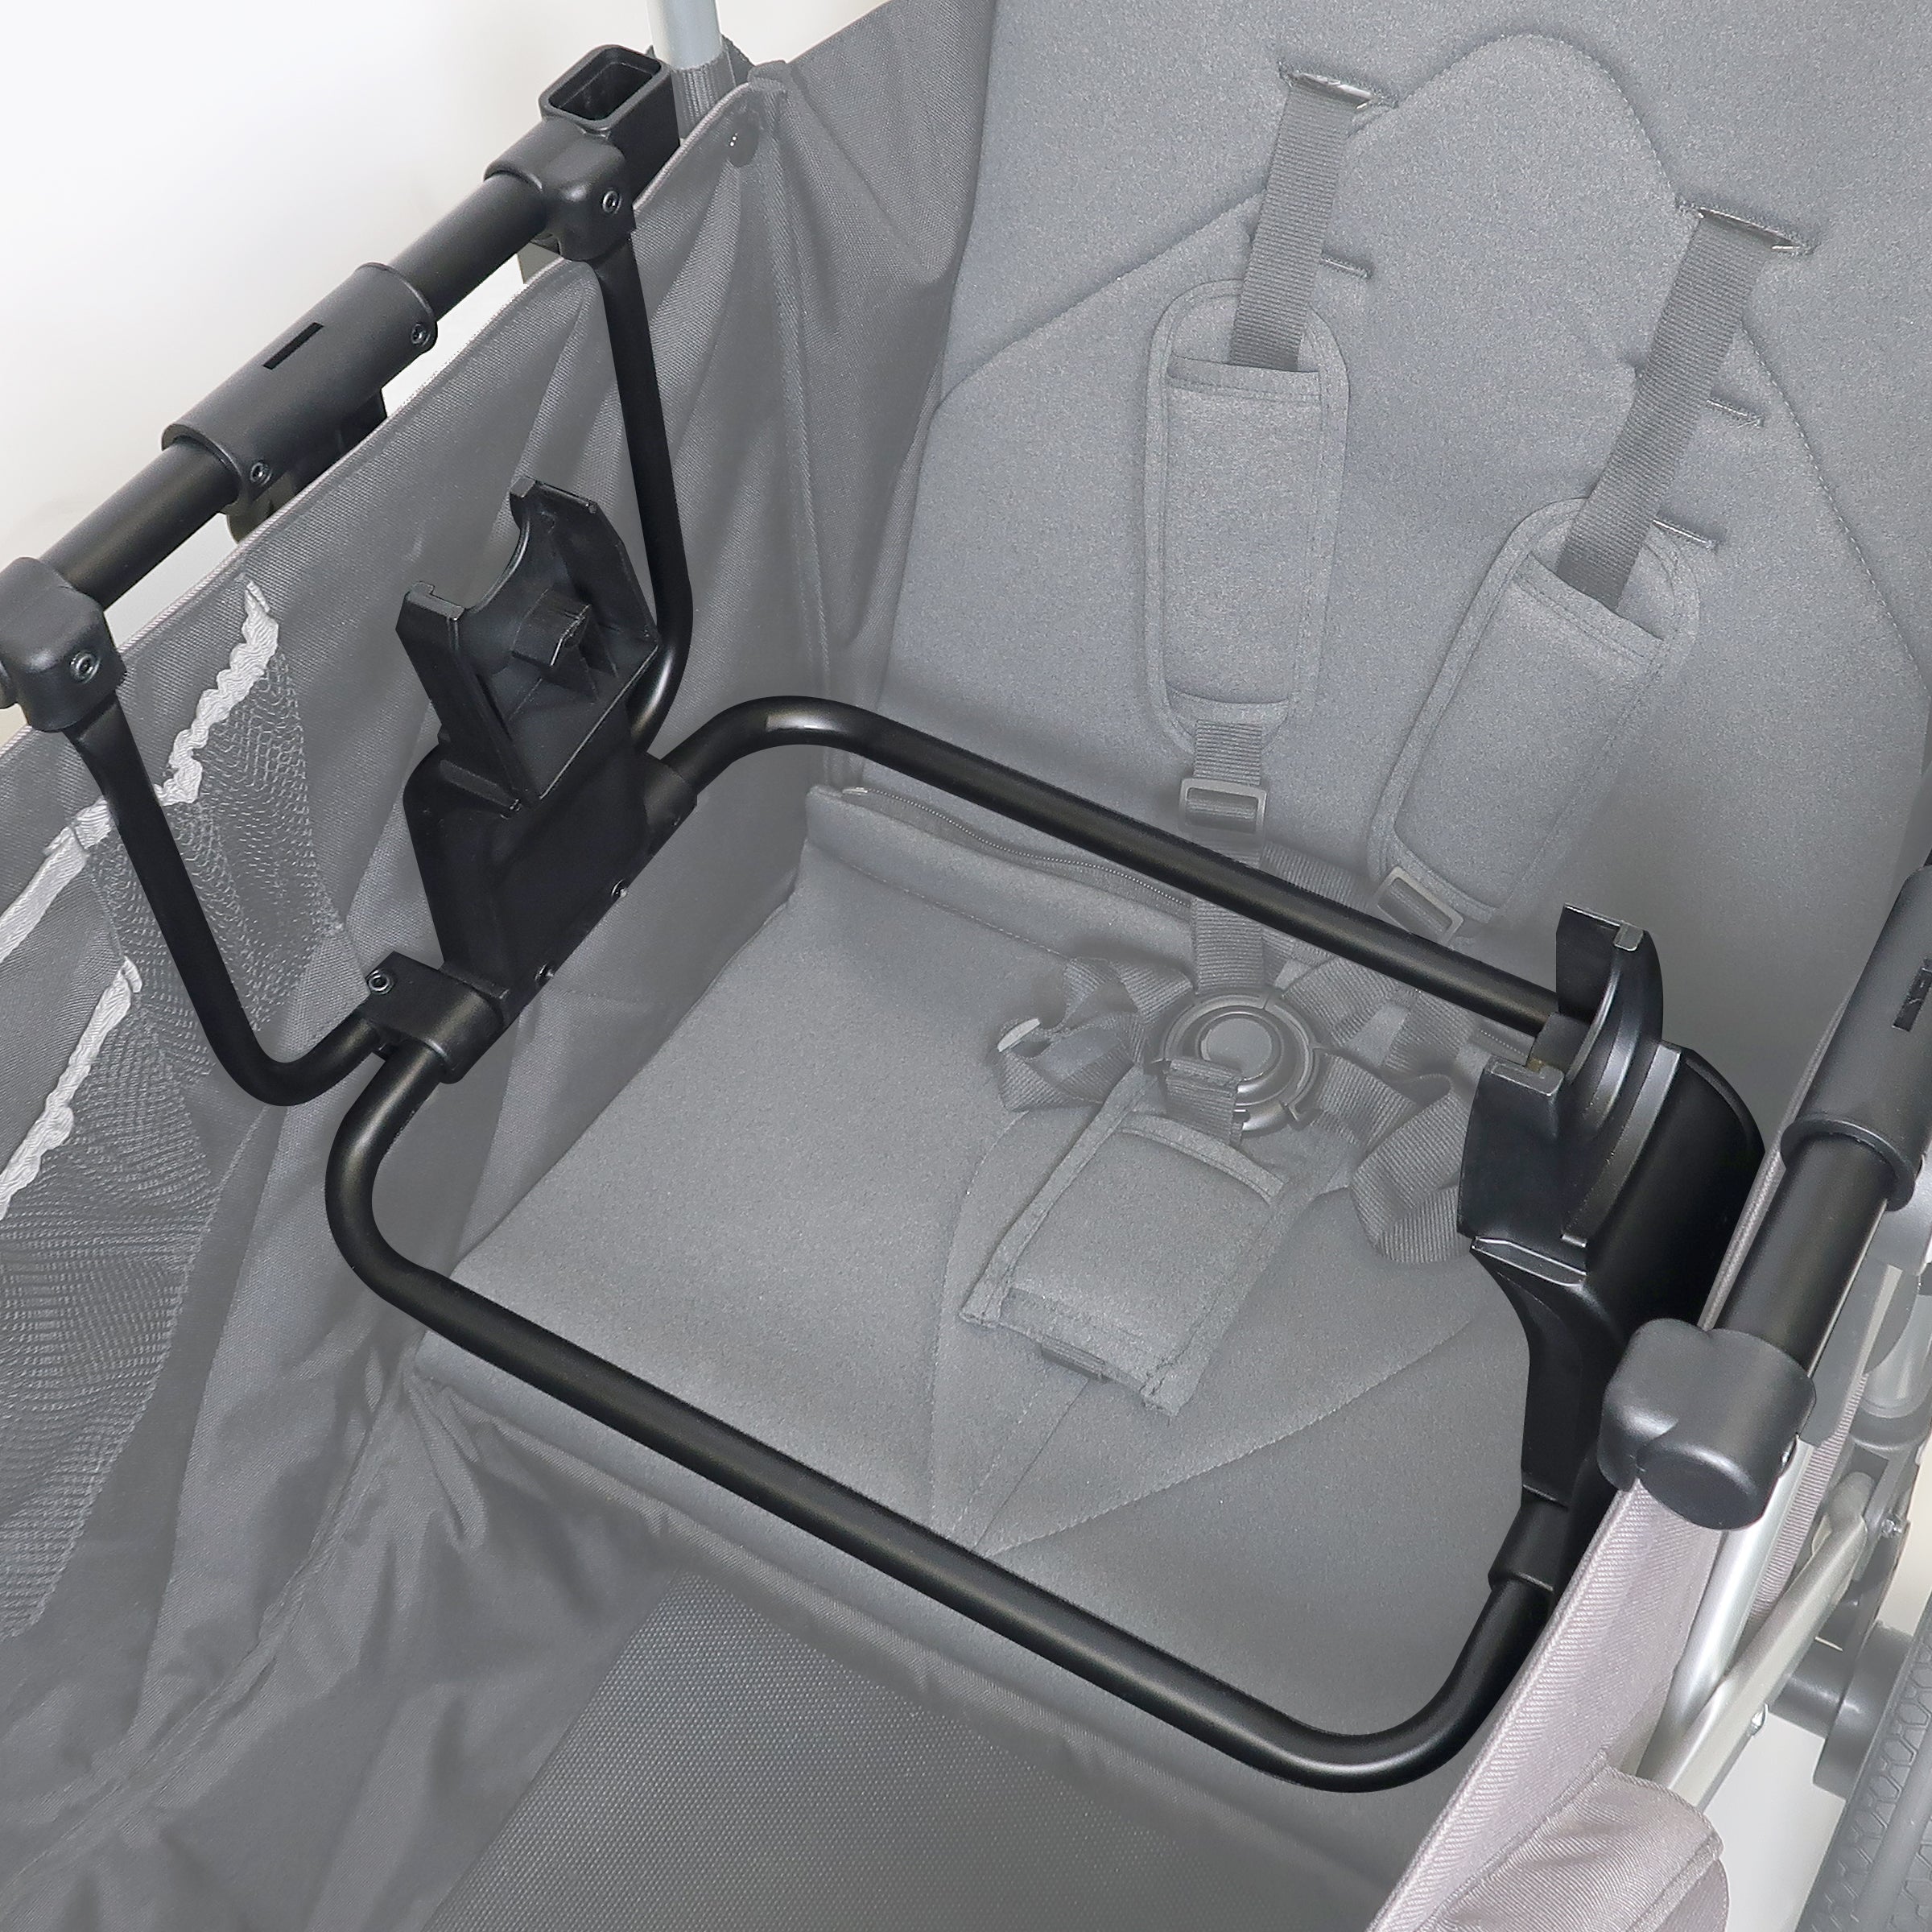 car seat adapter for maxi cosi, nuna and clek installed on the caravan stroller wagon